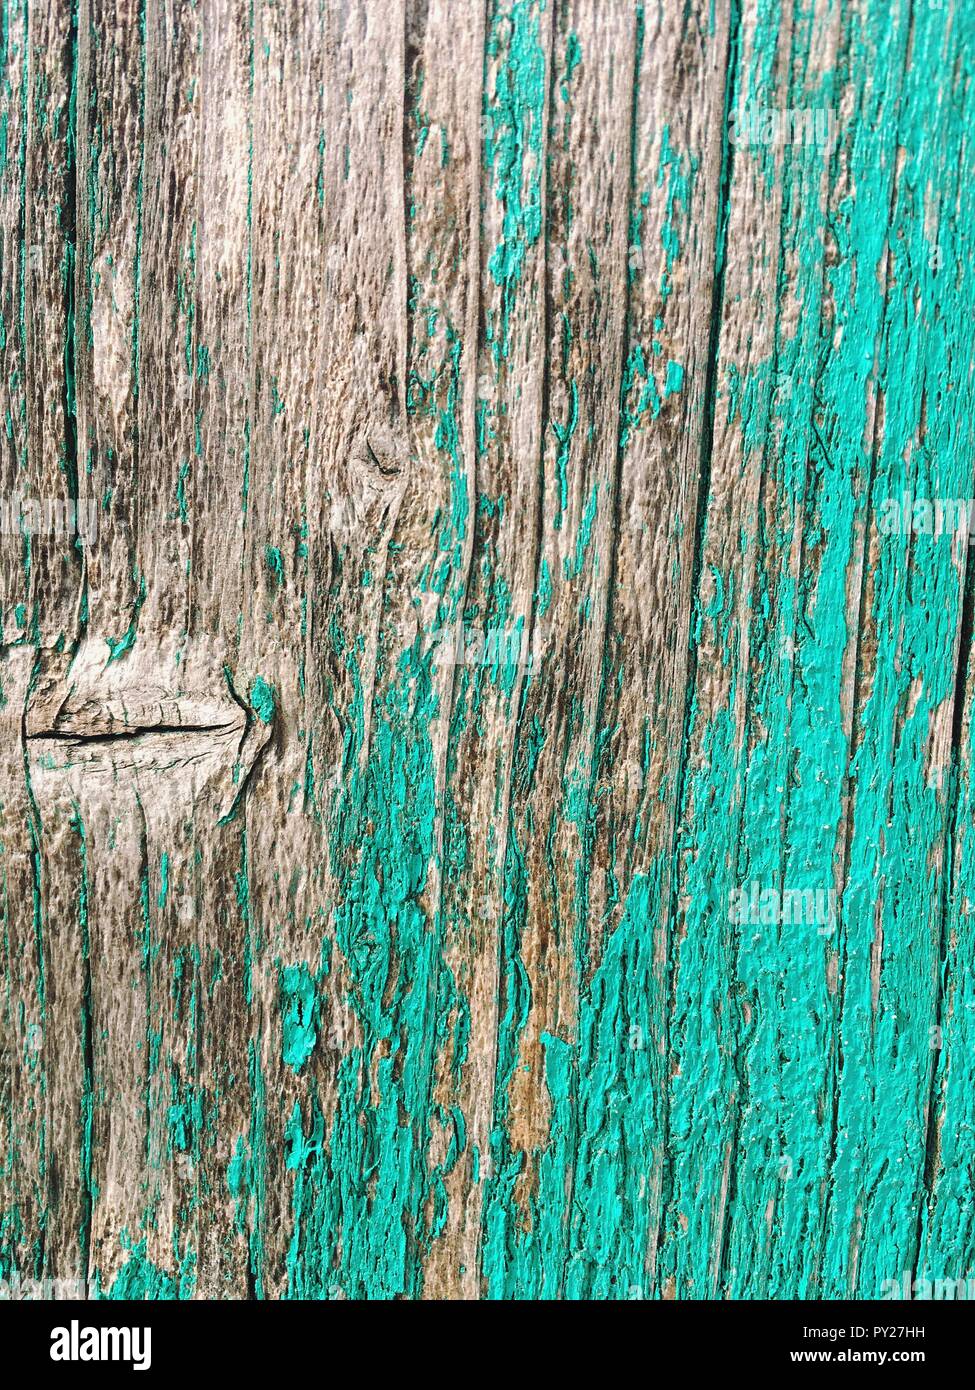 Faded green paint on wood Stock Photo